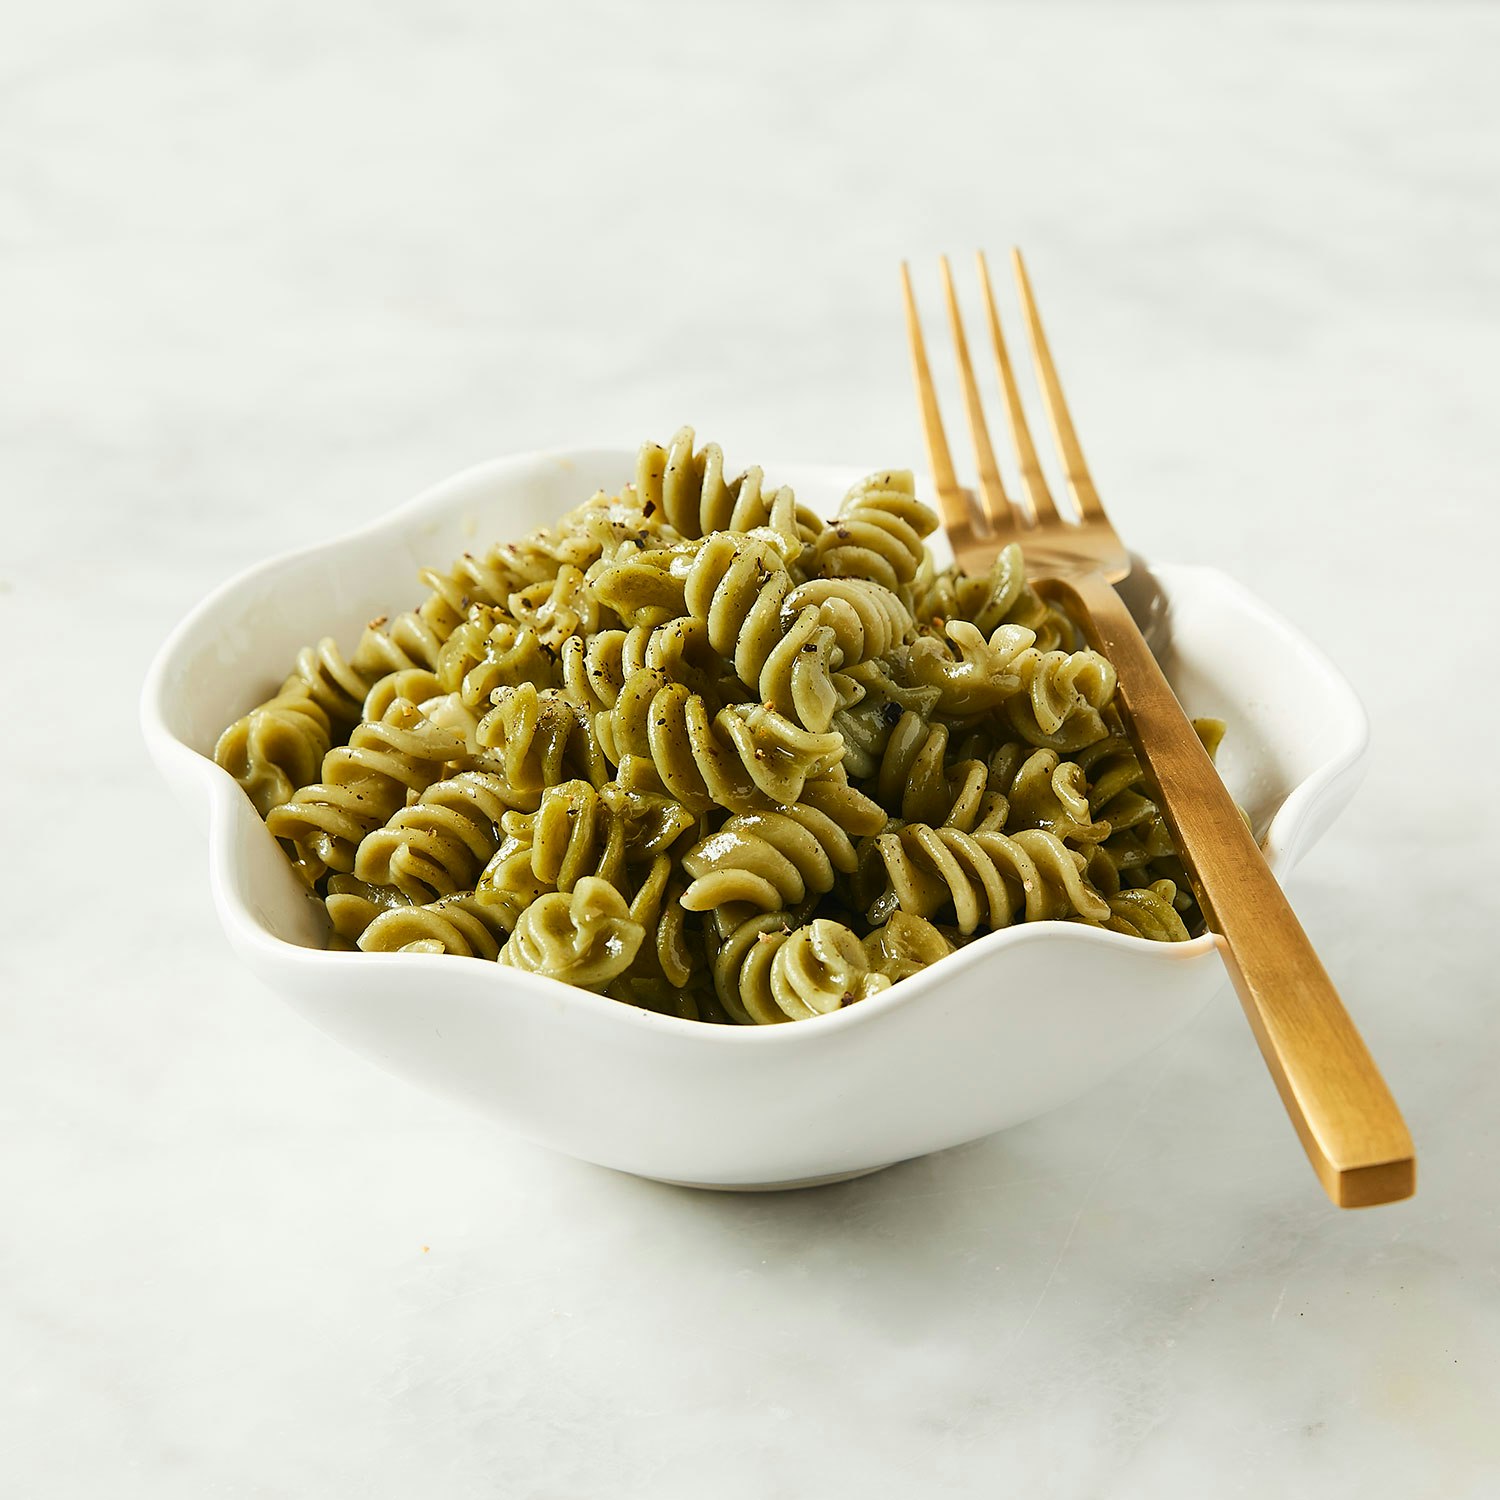 Scratch Pasta Spinach Fusilli specialty foods